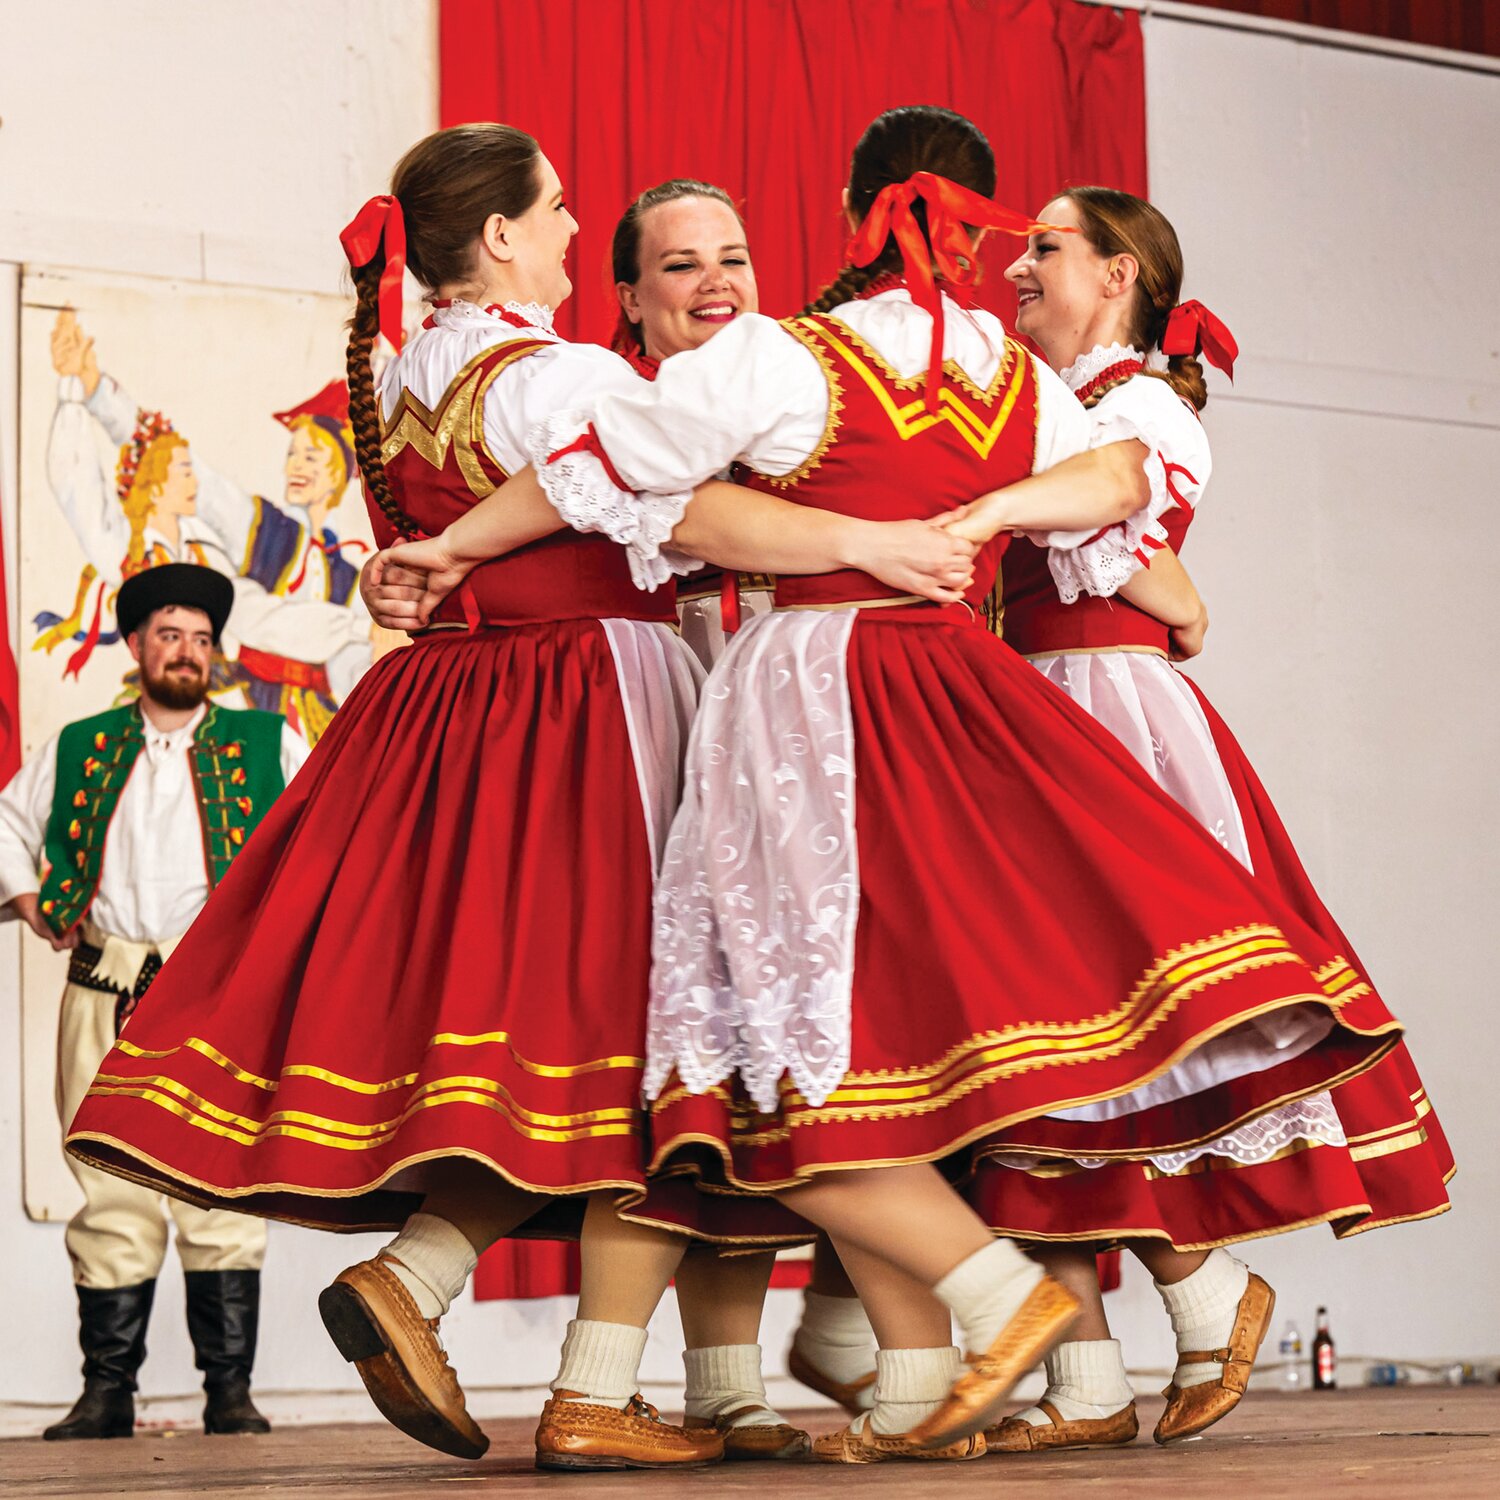 Polish folk dancers perform on stage during the Polish American Family Festival & Country Fair.